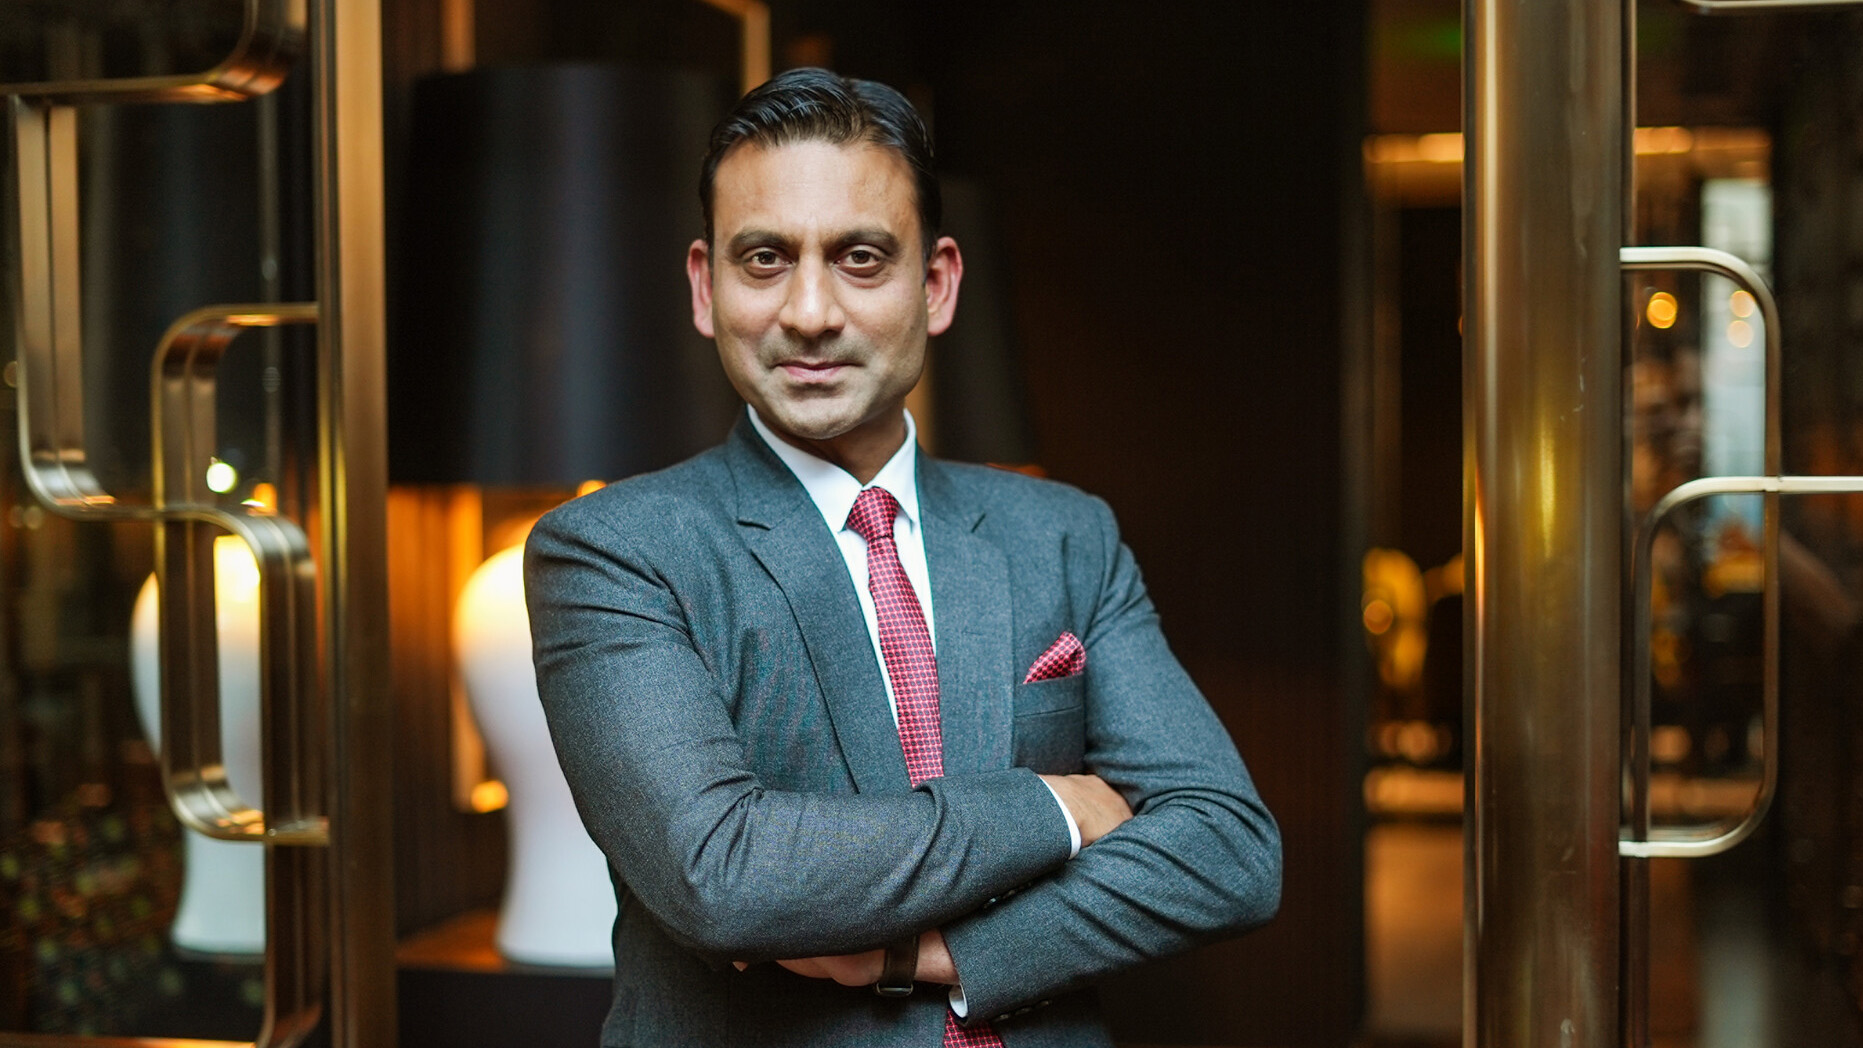 Four Seasons Hotel Bengaluru Appoints Savio Fernandes As Director Of Food And Beverage